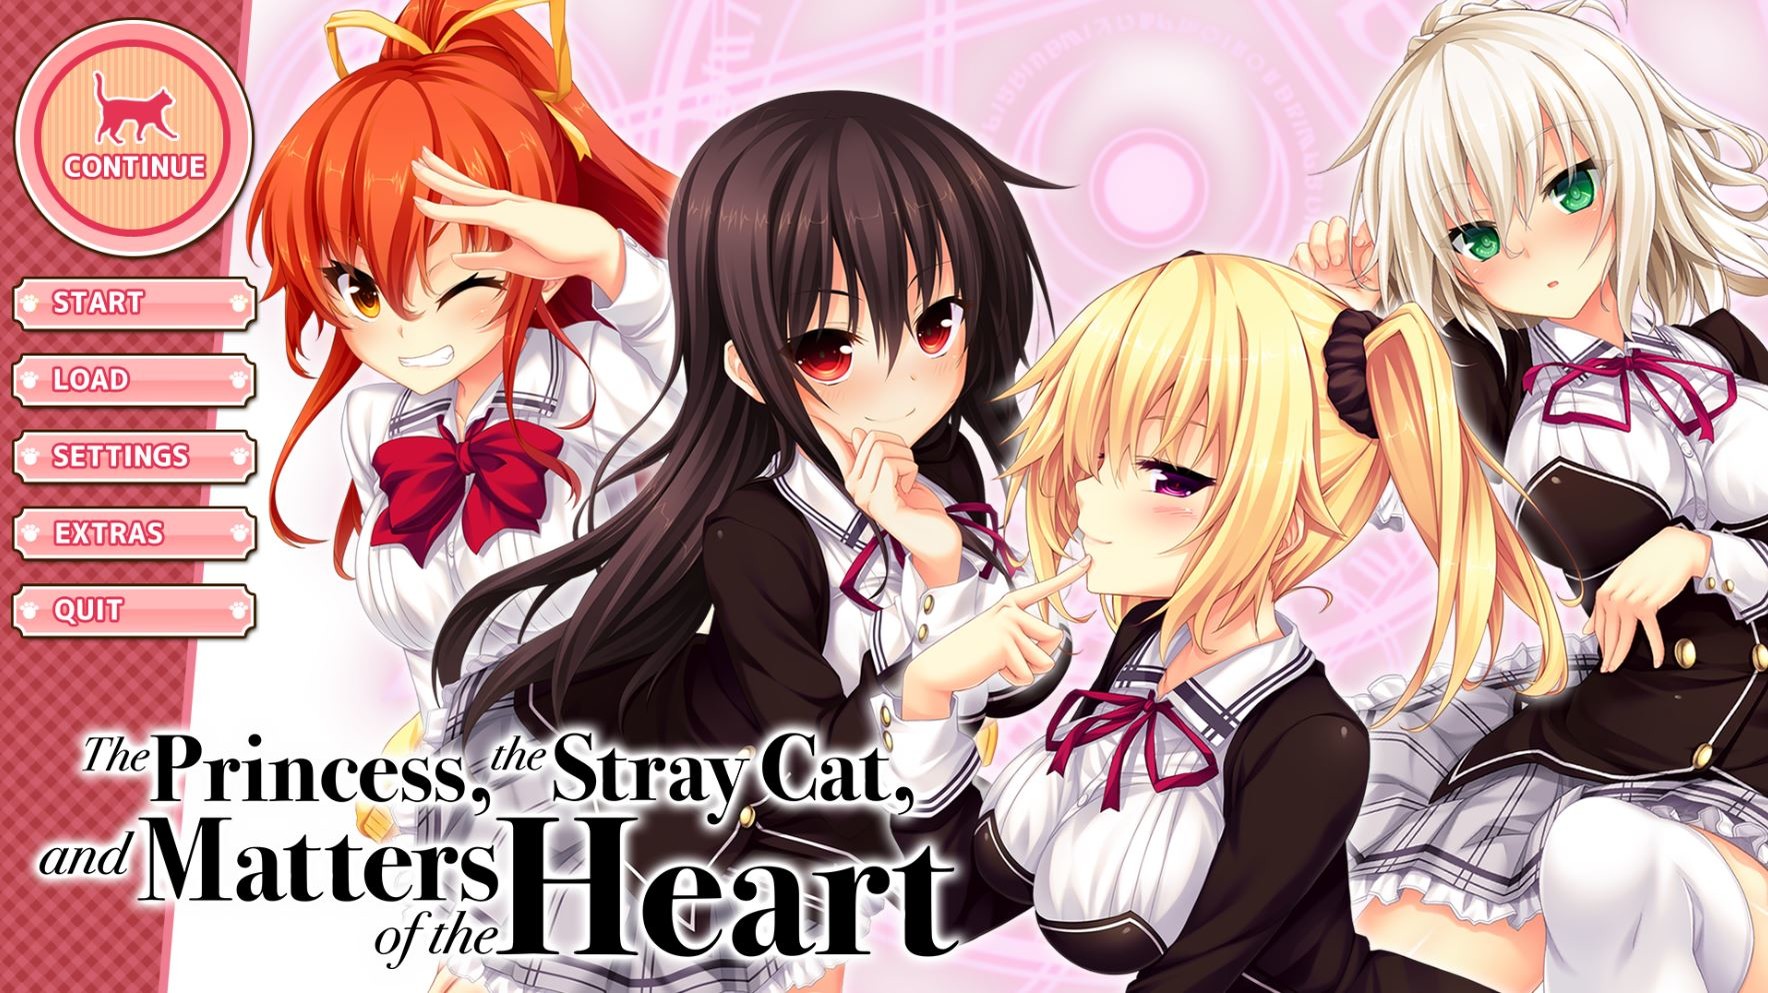 Find the best computers for The Princess, the Stray Cat, and Matters of the Heart